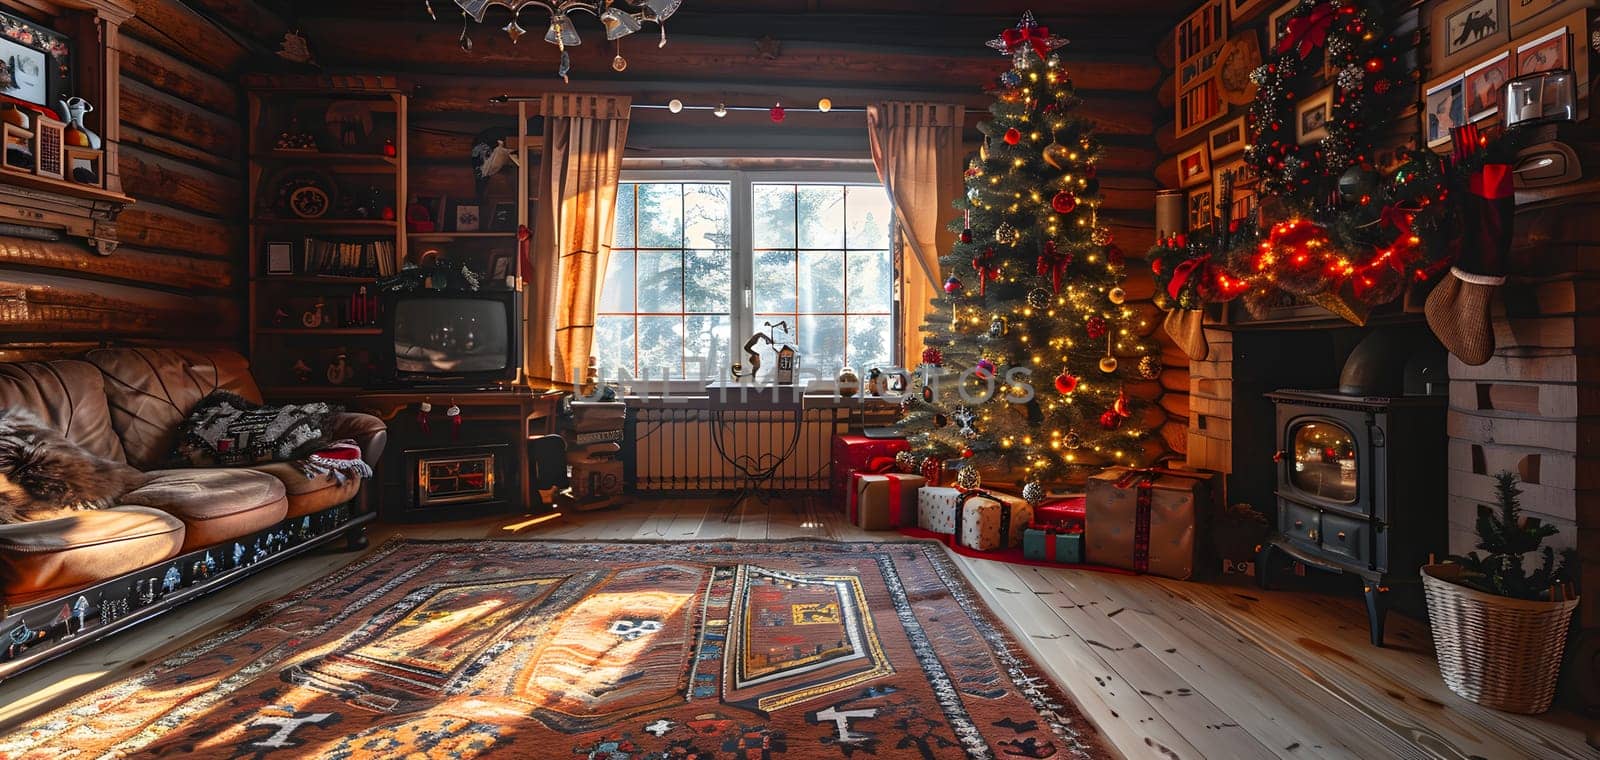 A festive living room decorated for Christmas with a beautiful Christmas tree, presents, and cozy wood flooring. The interior design sets the perfect ambiance for the holiday event